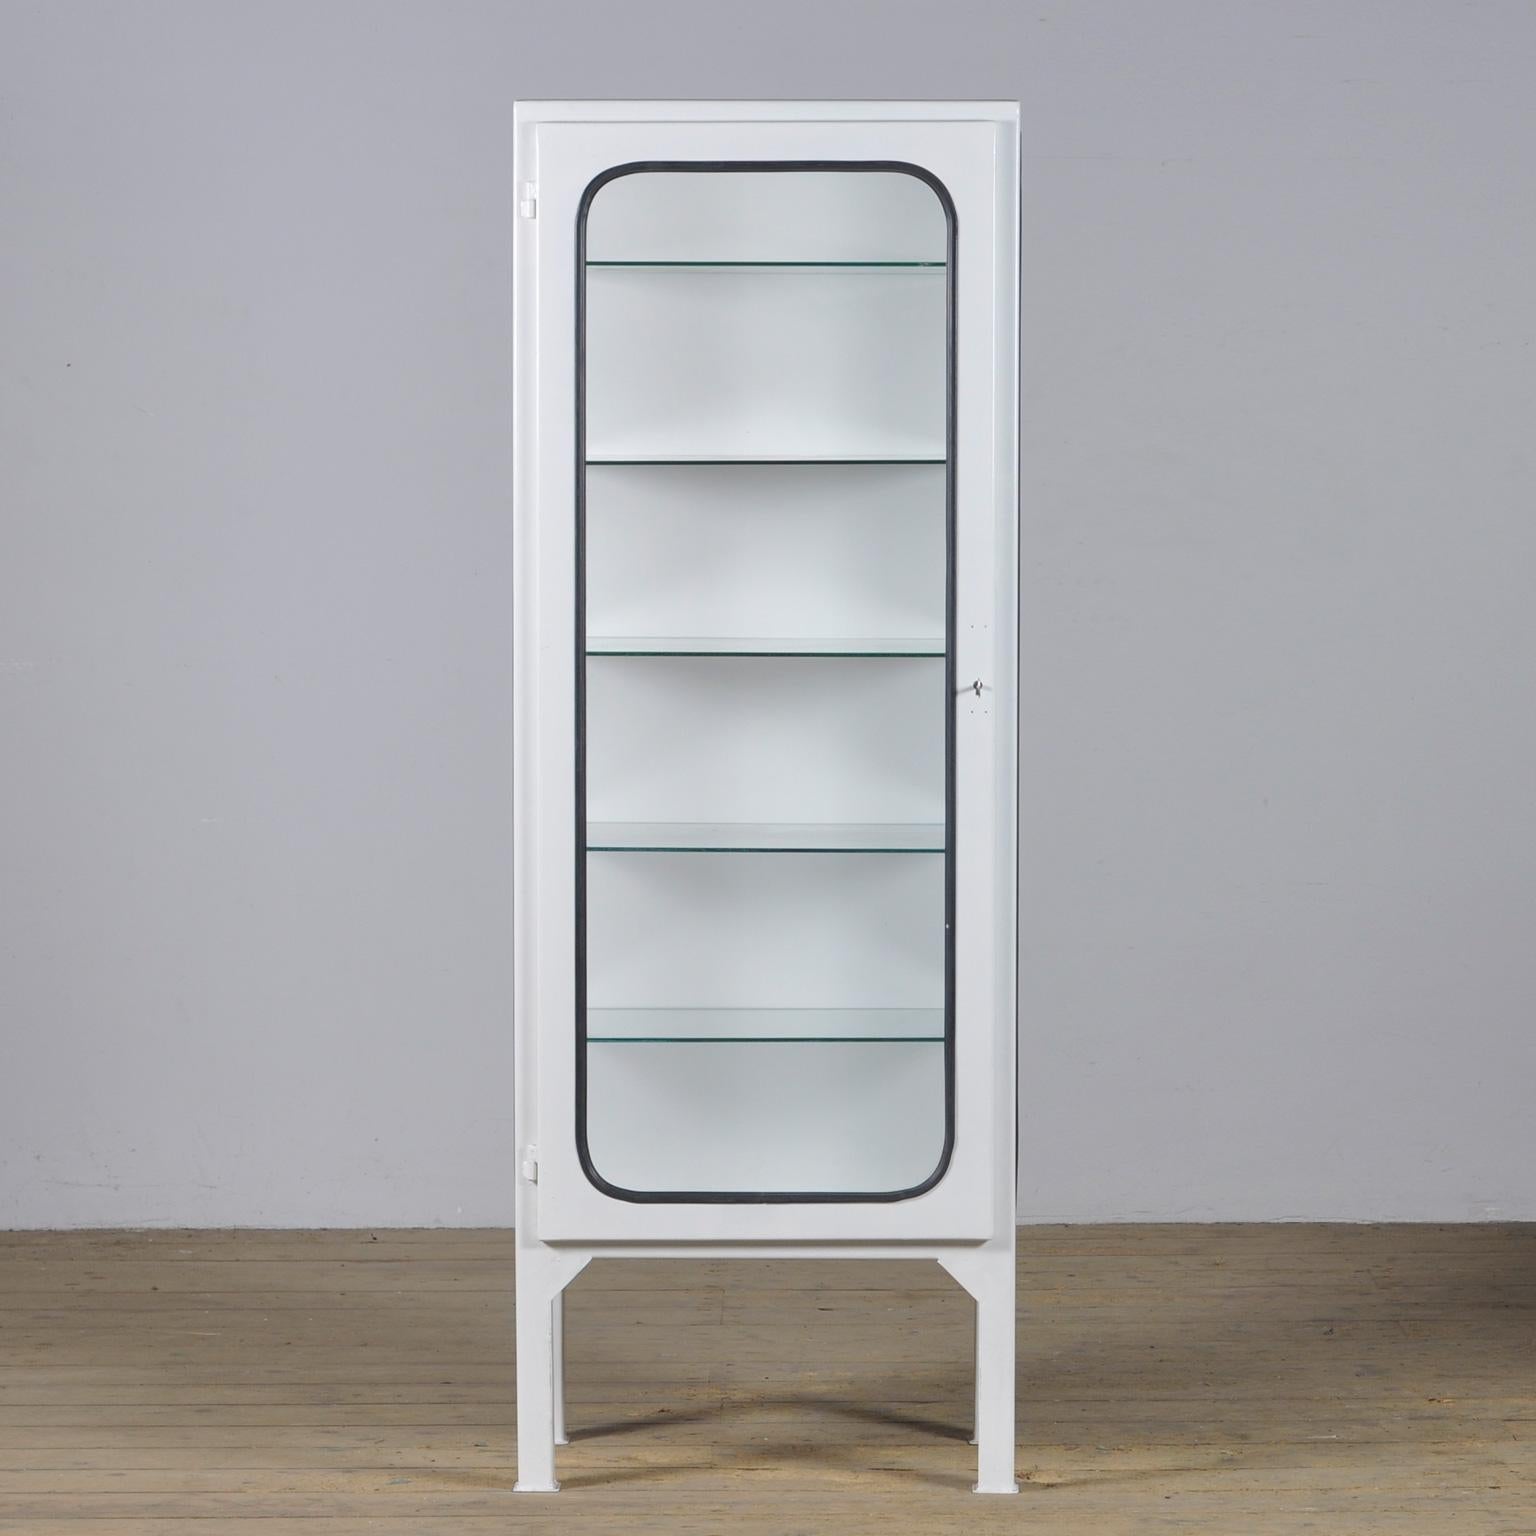 This medical cabinet was designed in the 1970s and was produced circa 1975 in hungary. It is made from iron and glass with new glass shelves. The glass is held by a black rubber strip. The cabinet features five adjustable glass shelves and a